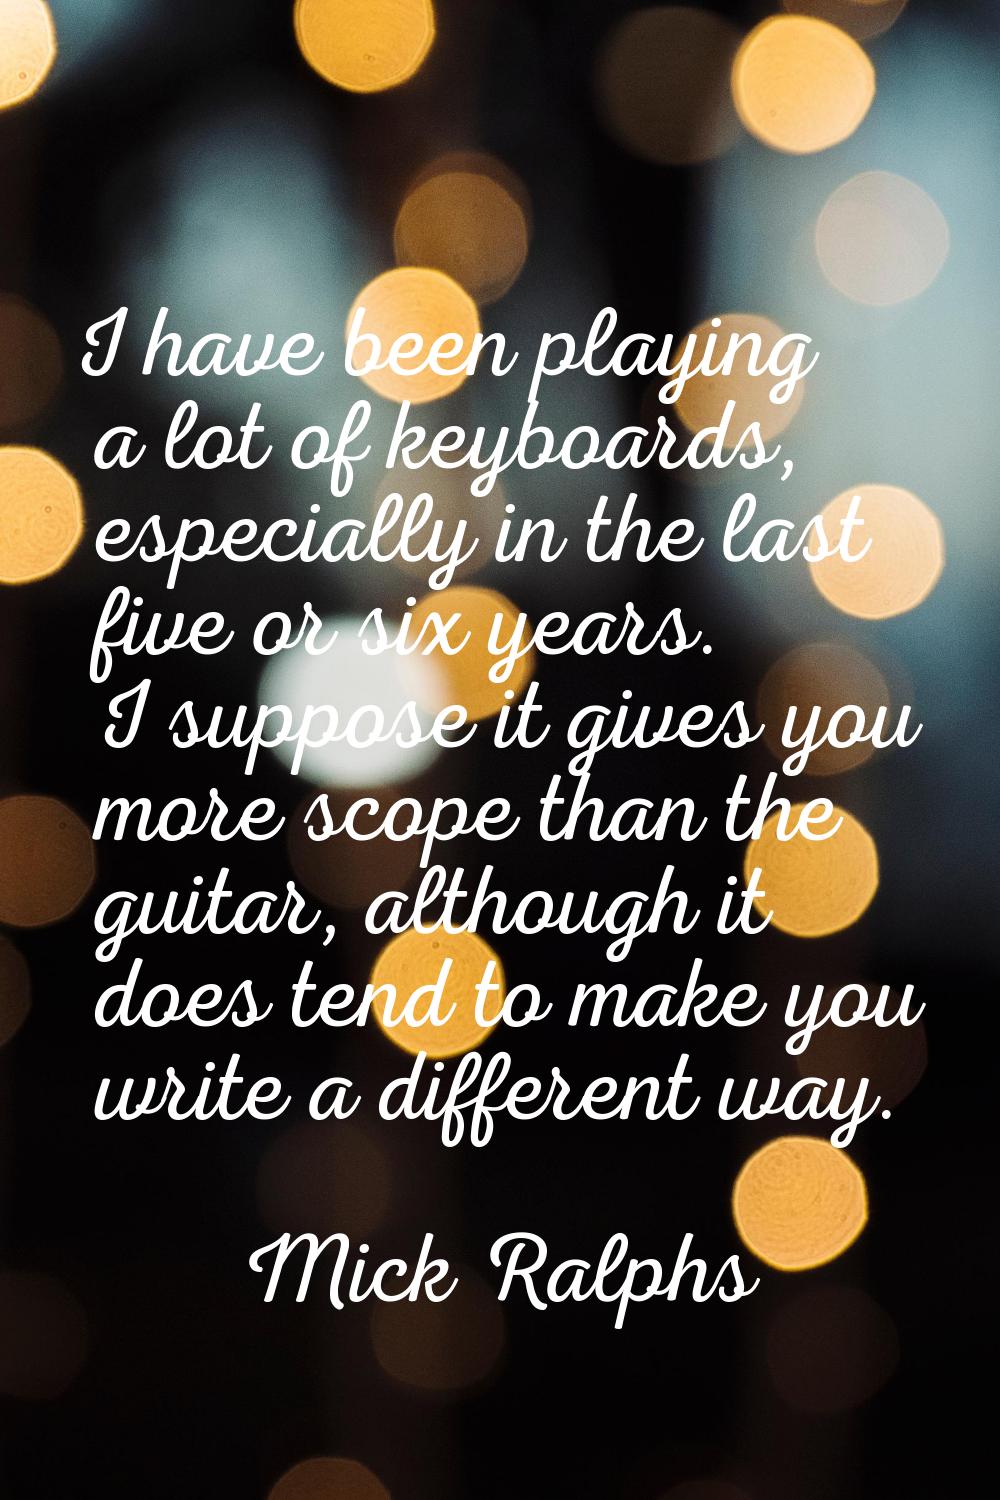 I have been playing a lot of keyboards, especially in the last five or six years. I suppose it give